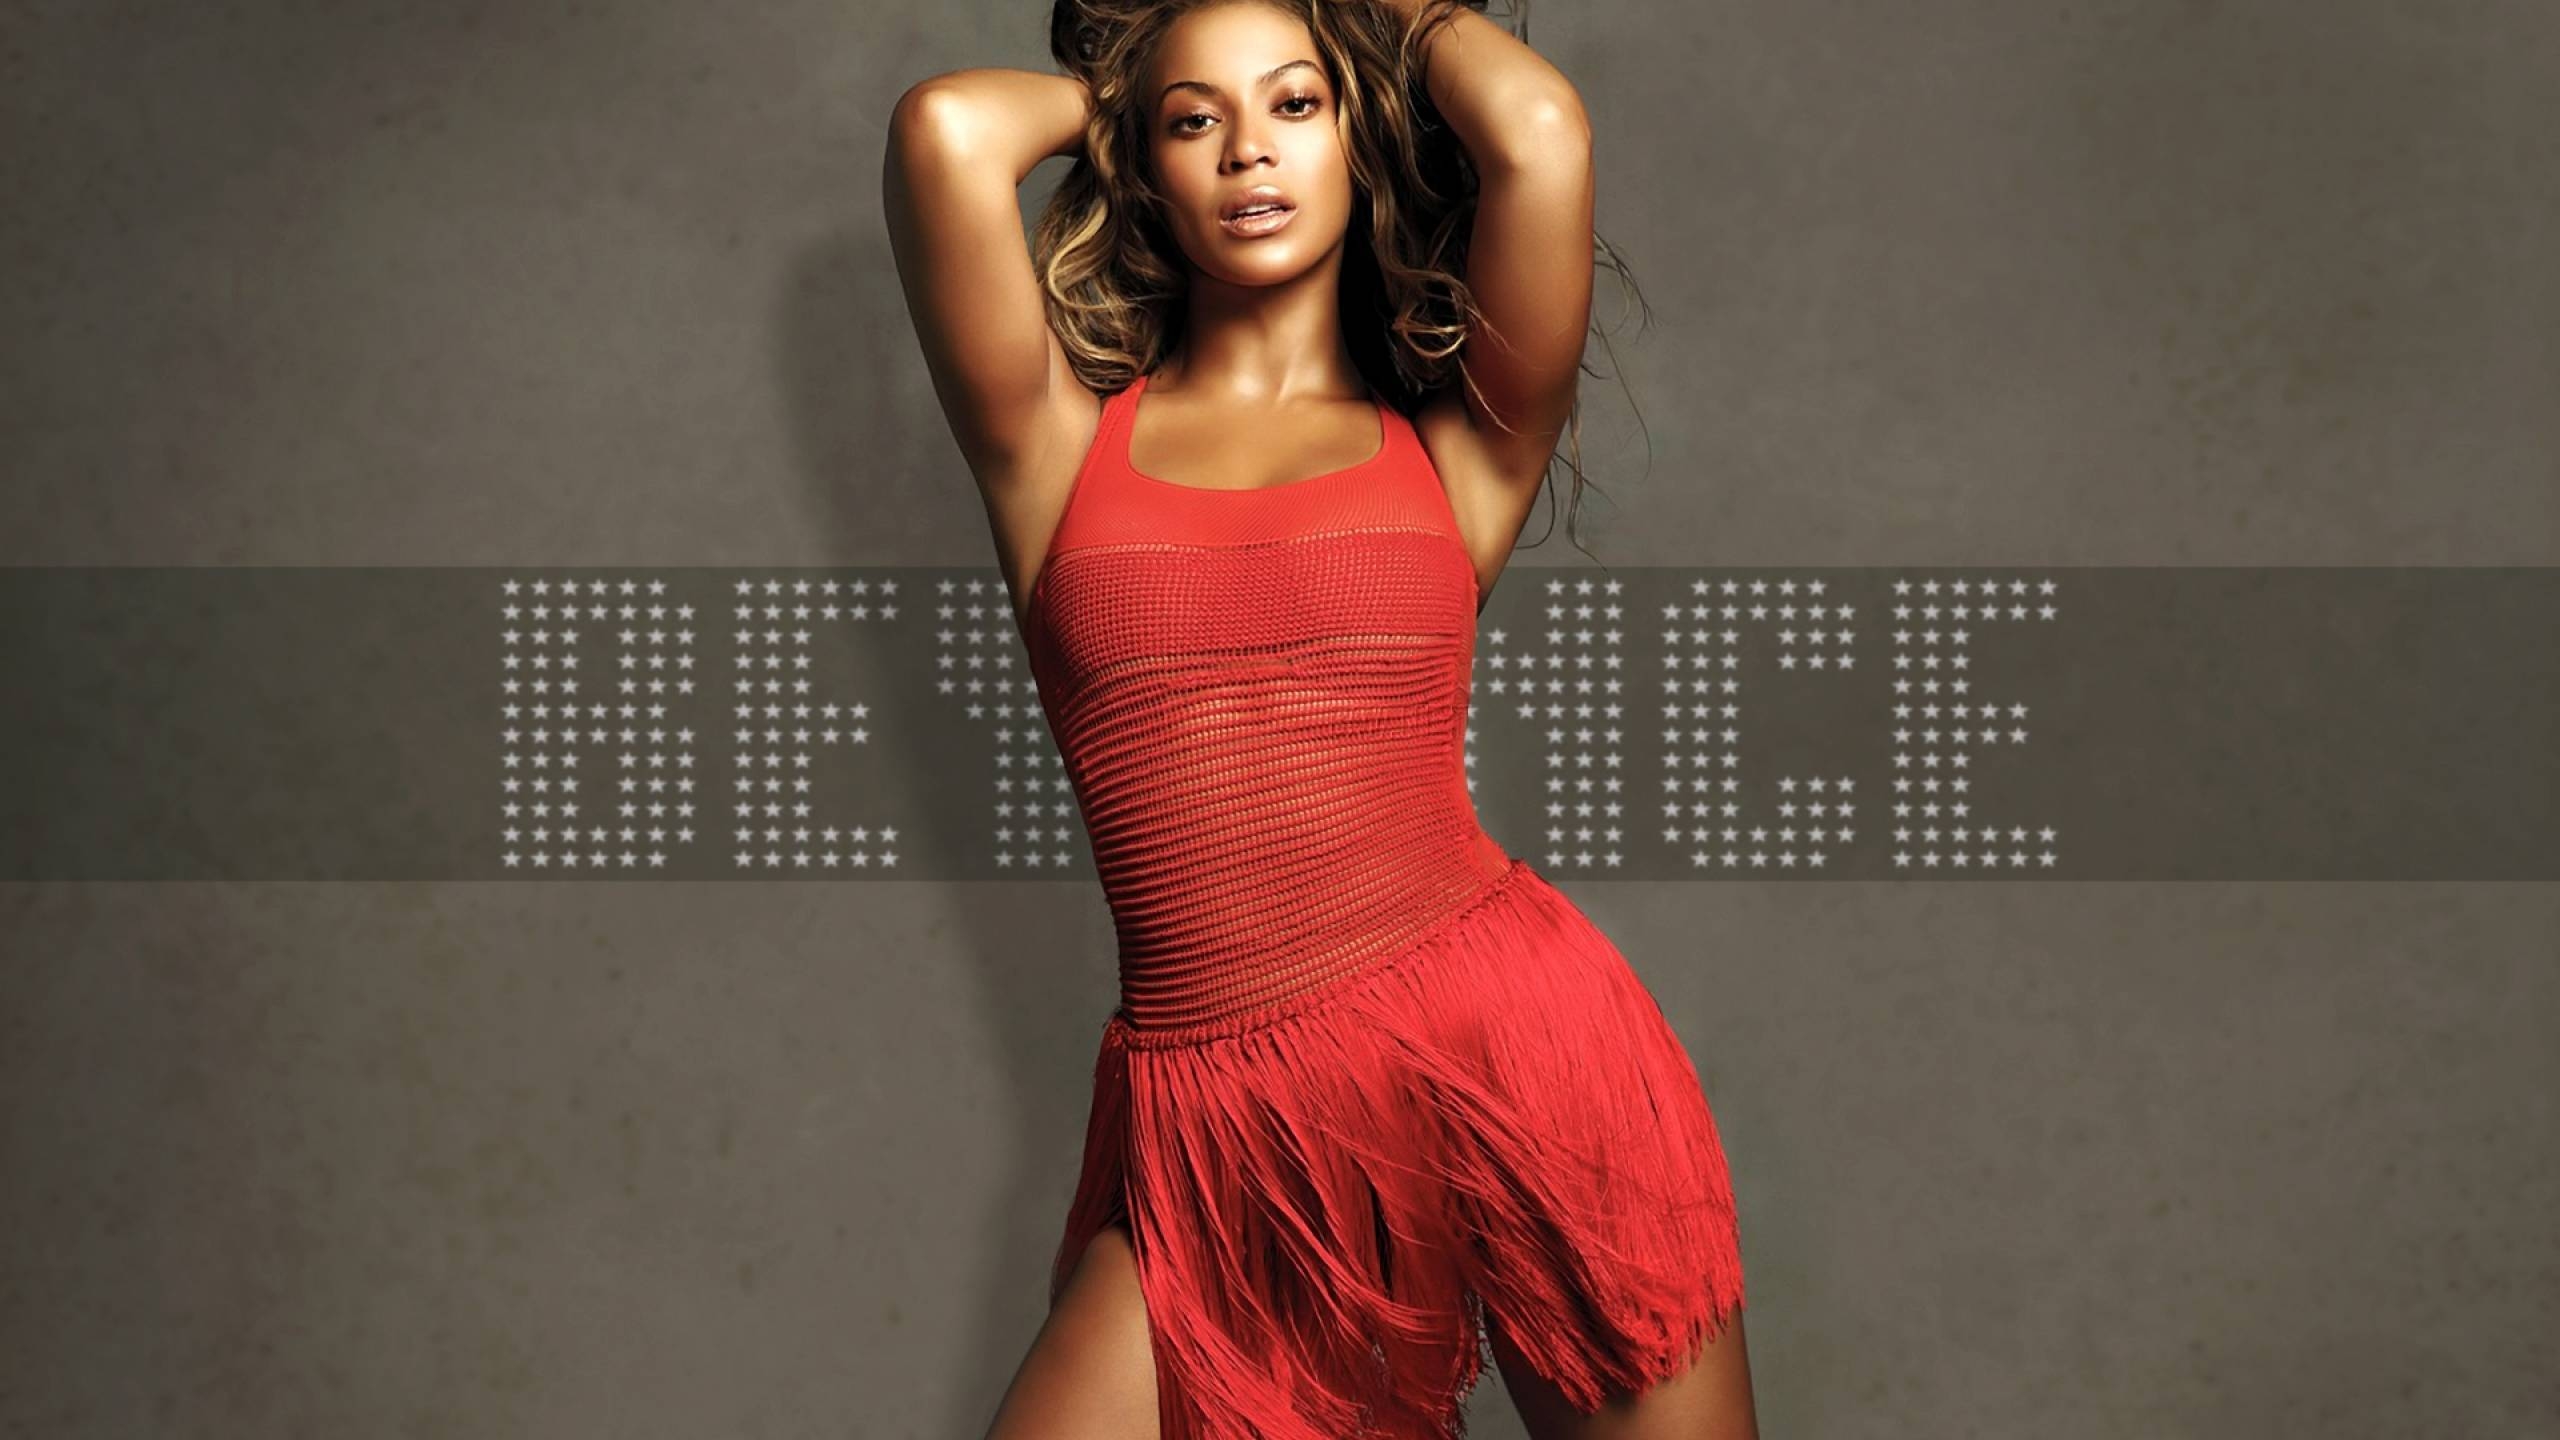 Beautiful Beyonce for 2560x1440 HDTV resolution